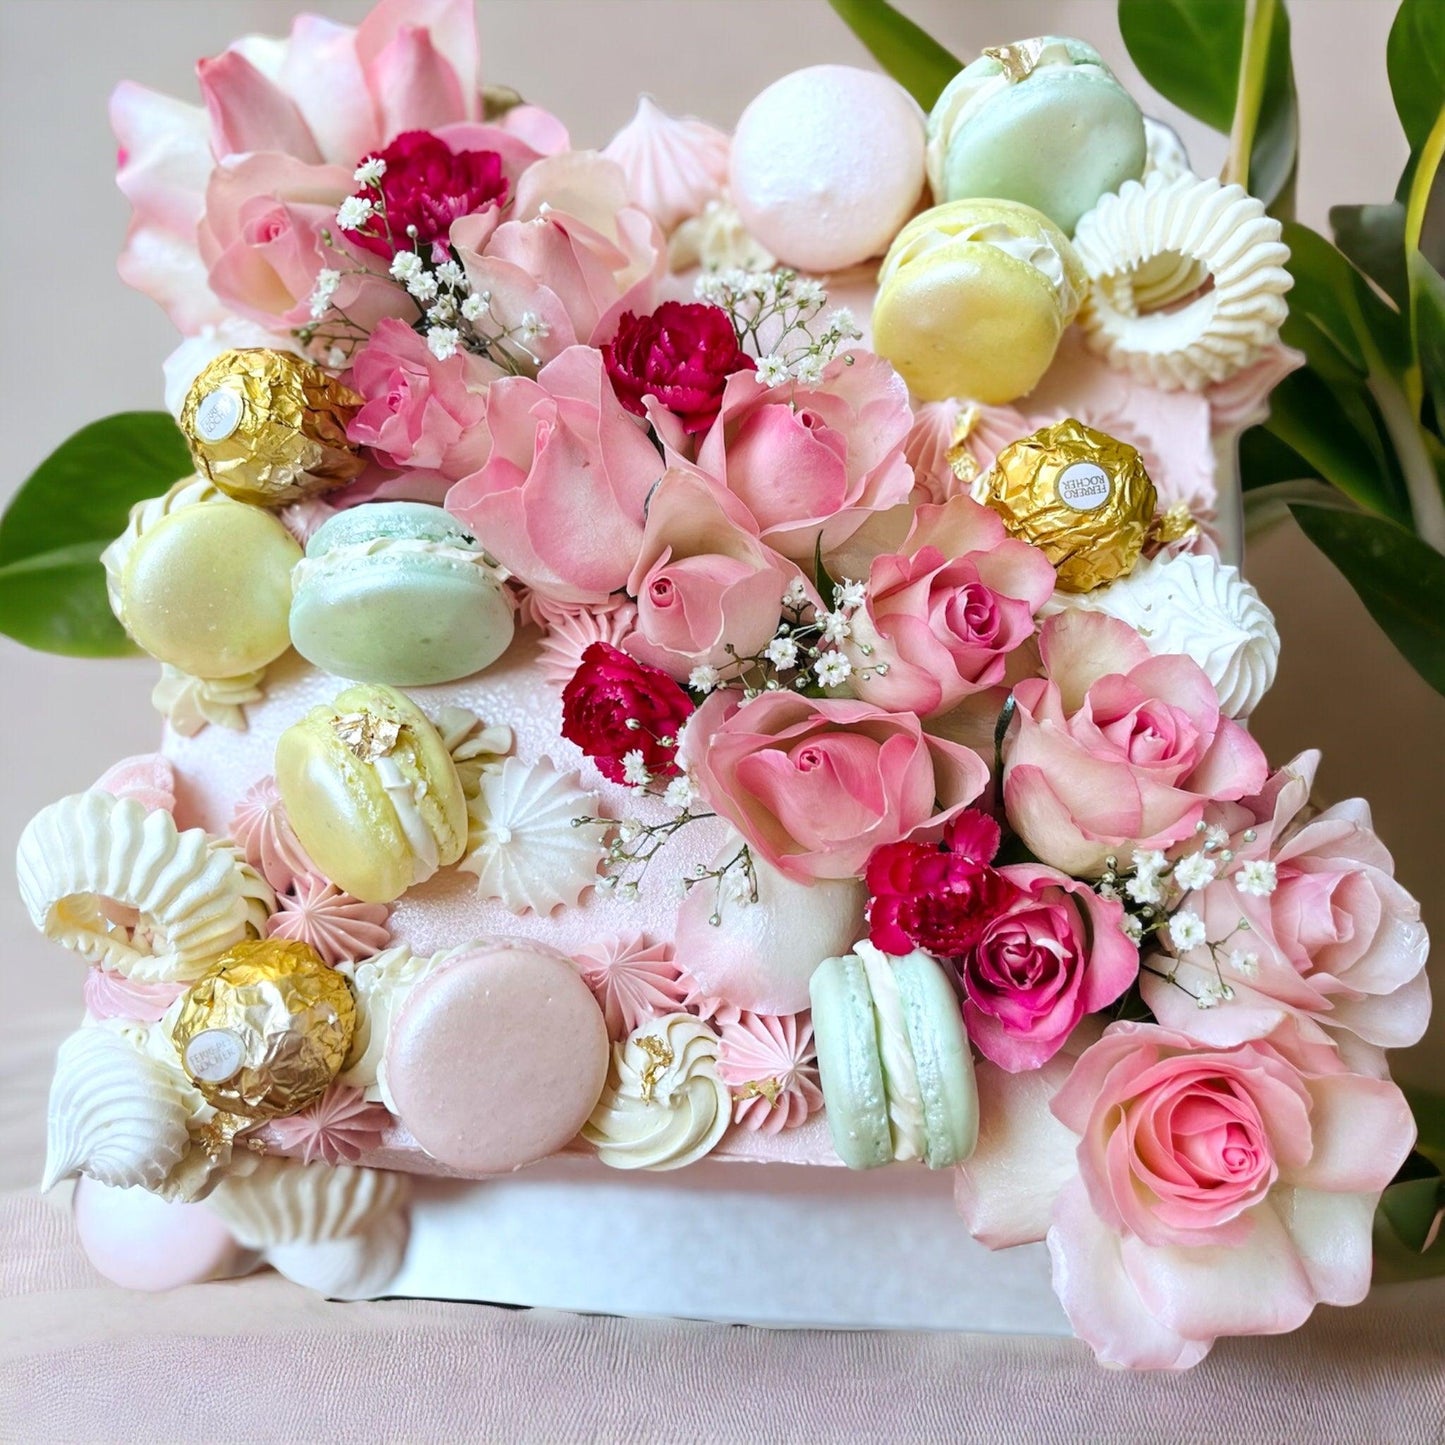 BIRTHDAY CAKE WITH MACARONS - Naturally_deliciousss